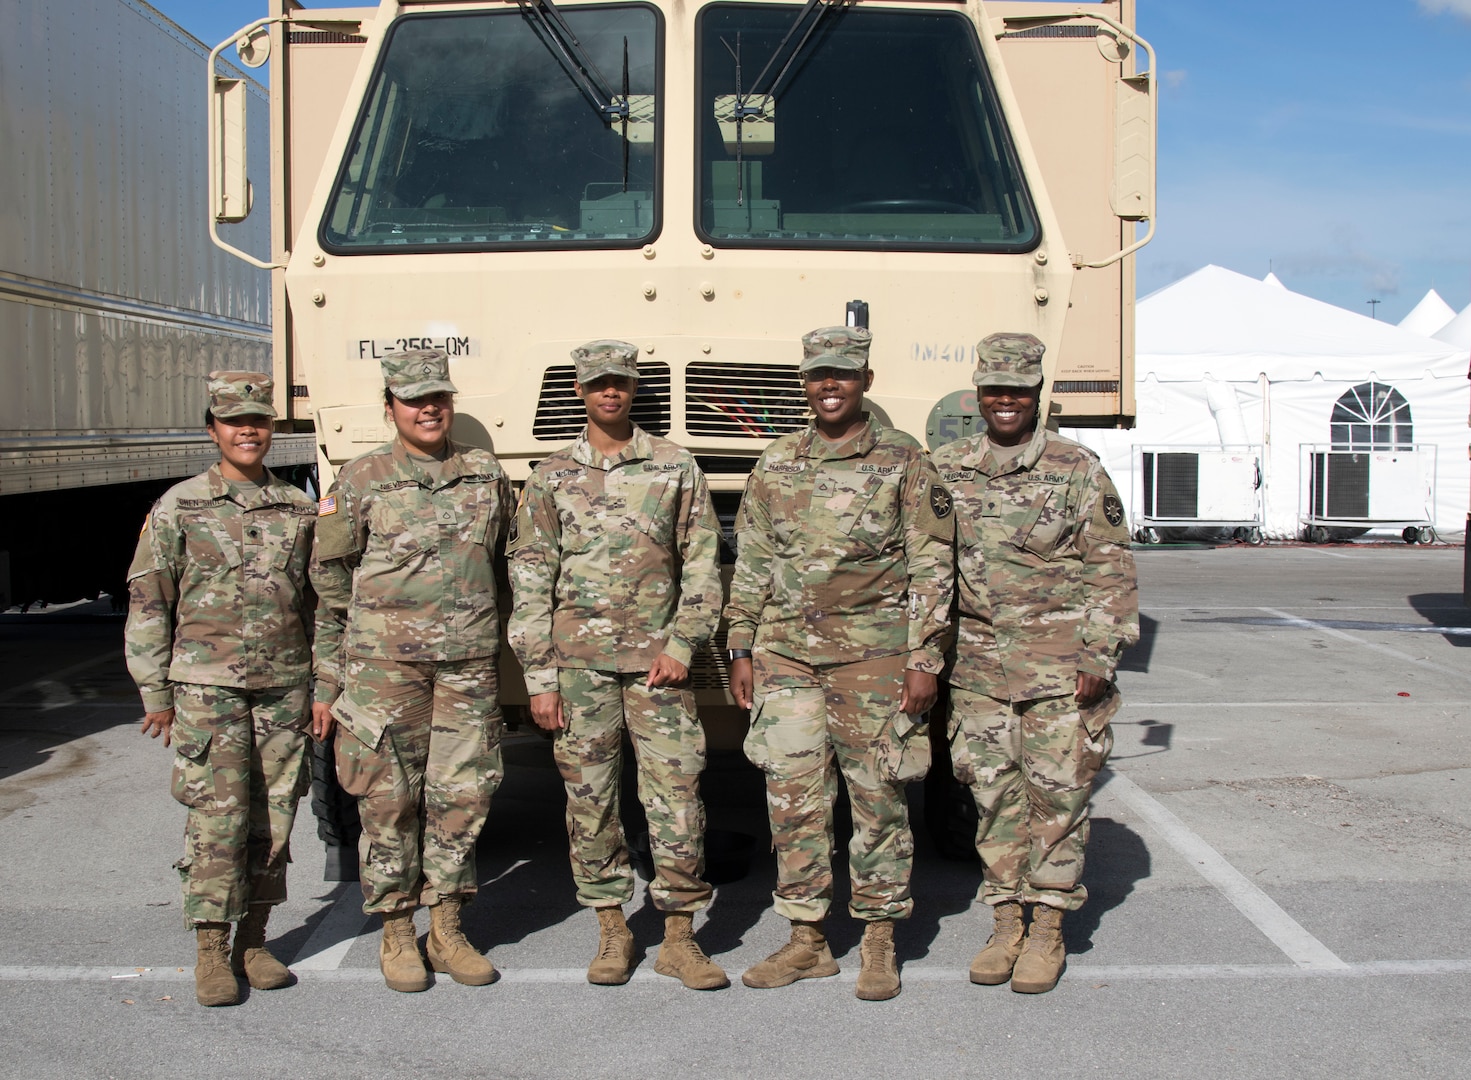 Left to right, Spc. Francesca Chen-Shue, Pfc. Monica Nieves, Chief Warrant Officer Latania McCook, Pfc. Tyanna Harrison and Spc. Taquisha Hubbard, members of the all-female 356th Quartermaster (War Wagon) Company at a COVID-19 testing site in Miami Gardens, Florida.